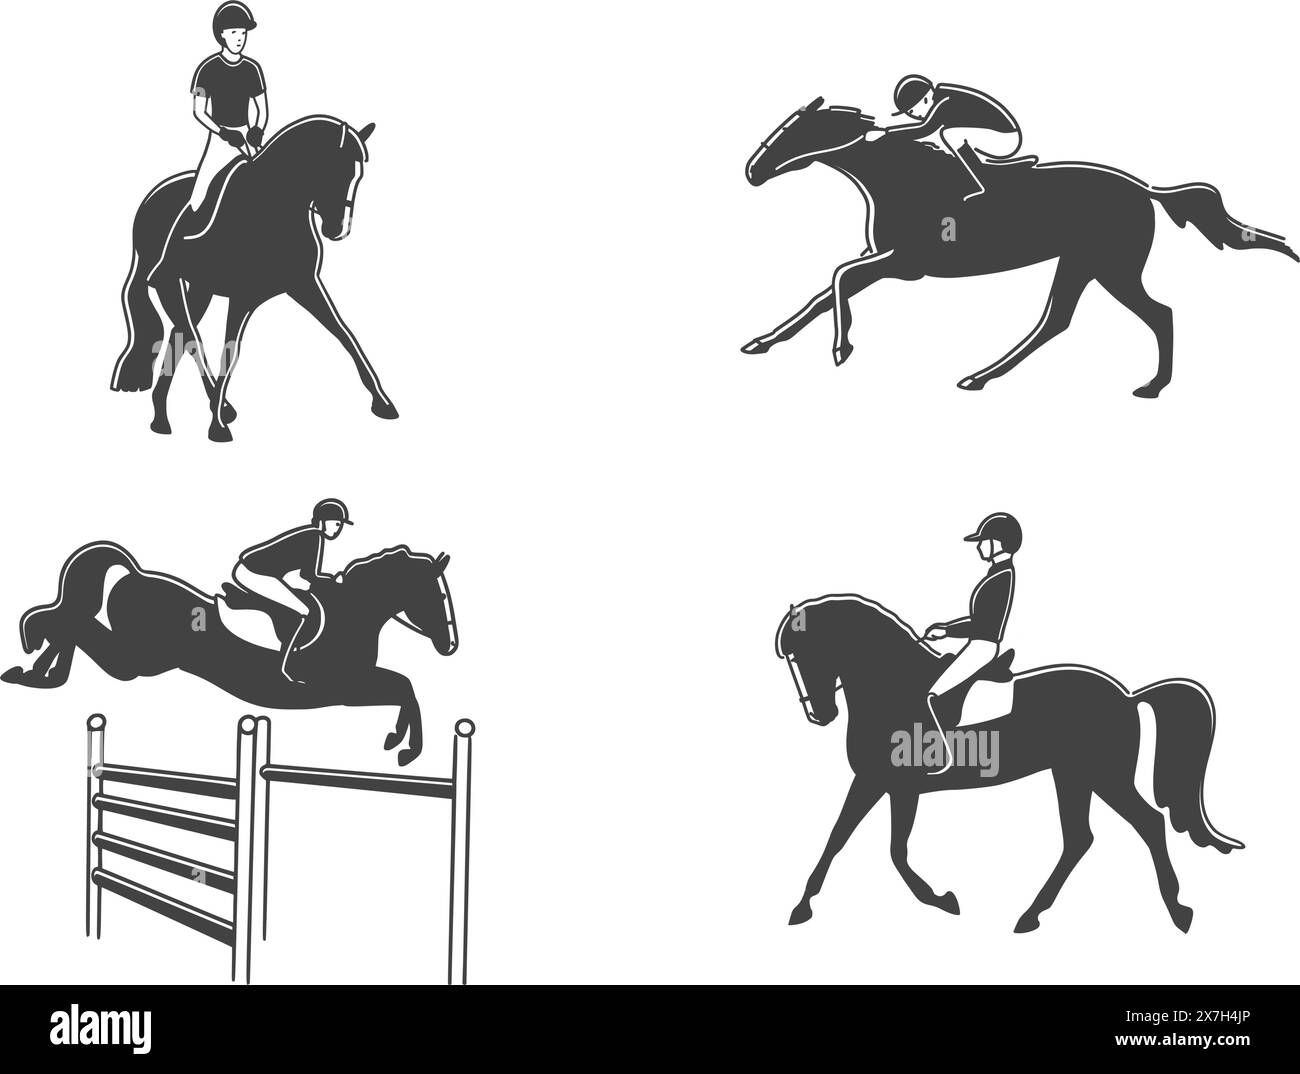 Horses and riders stylized silhouettes, equestrian, dressage, show jumping, horse racing Stock Vector